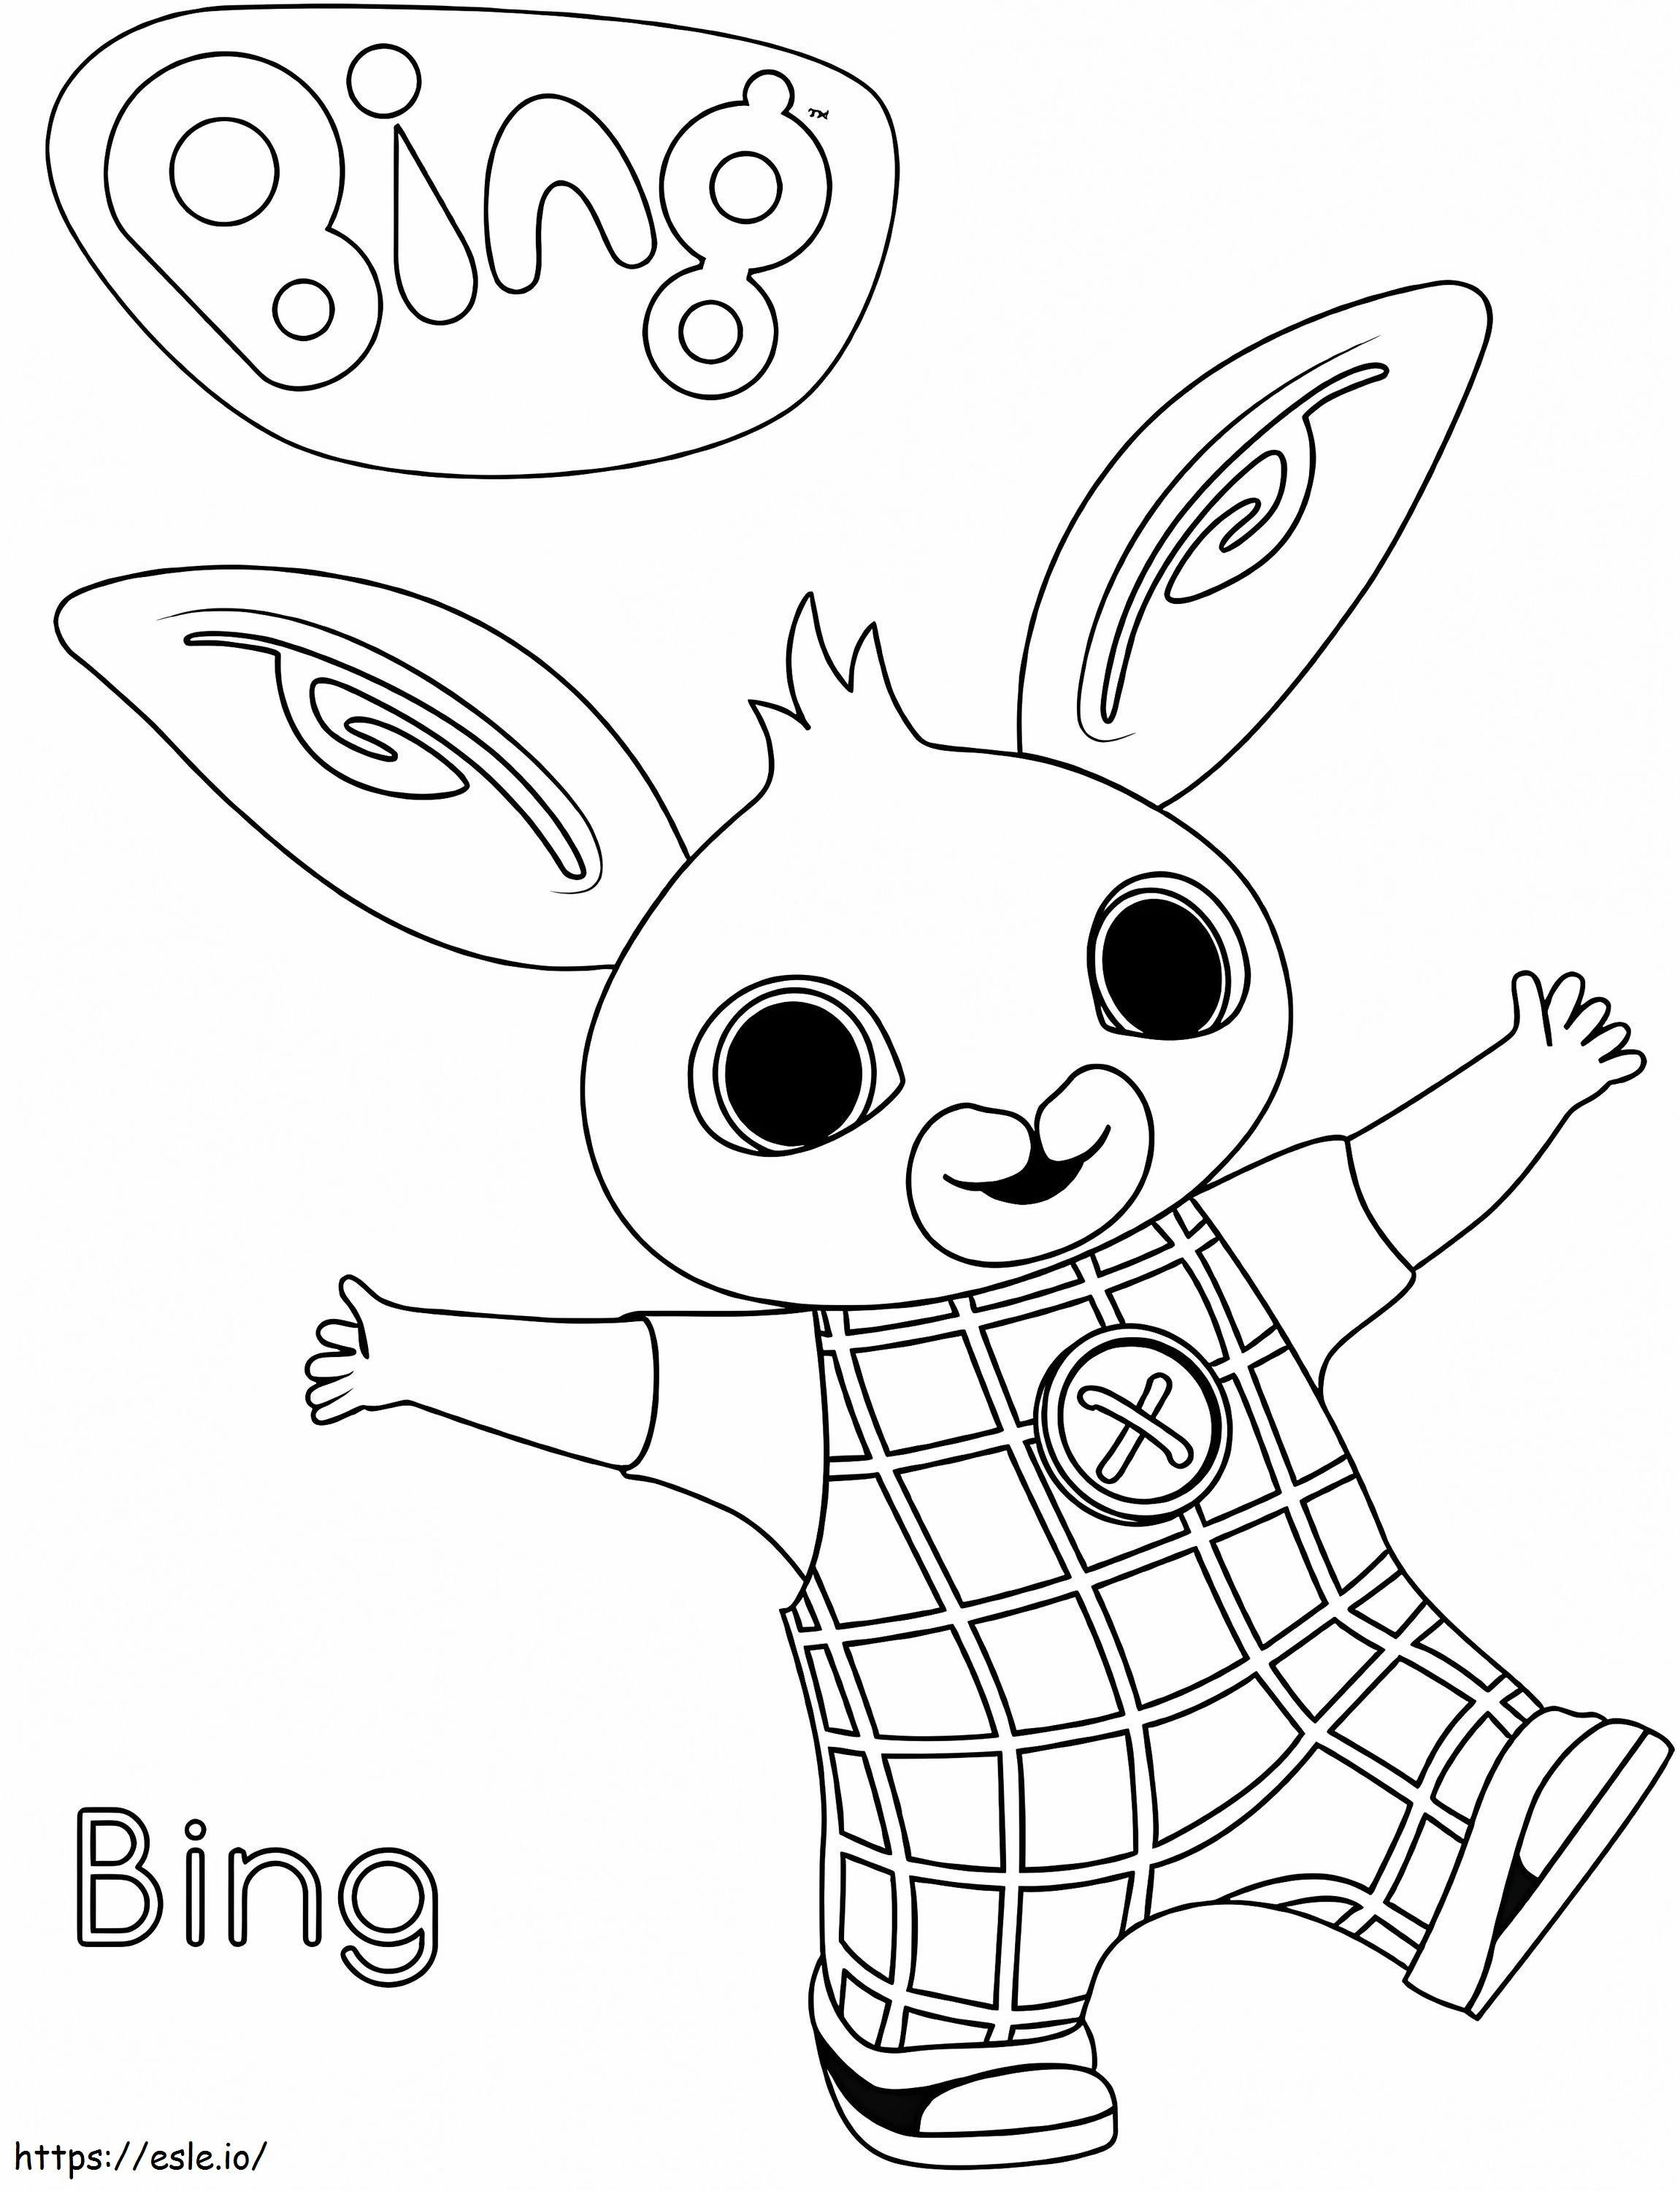 Uh1969B coloring page